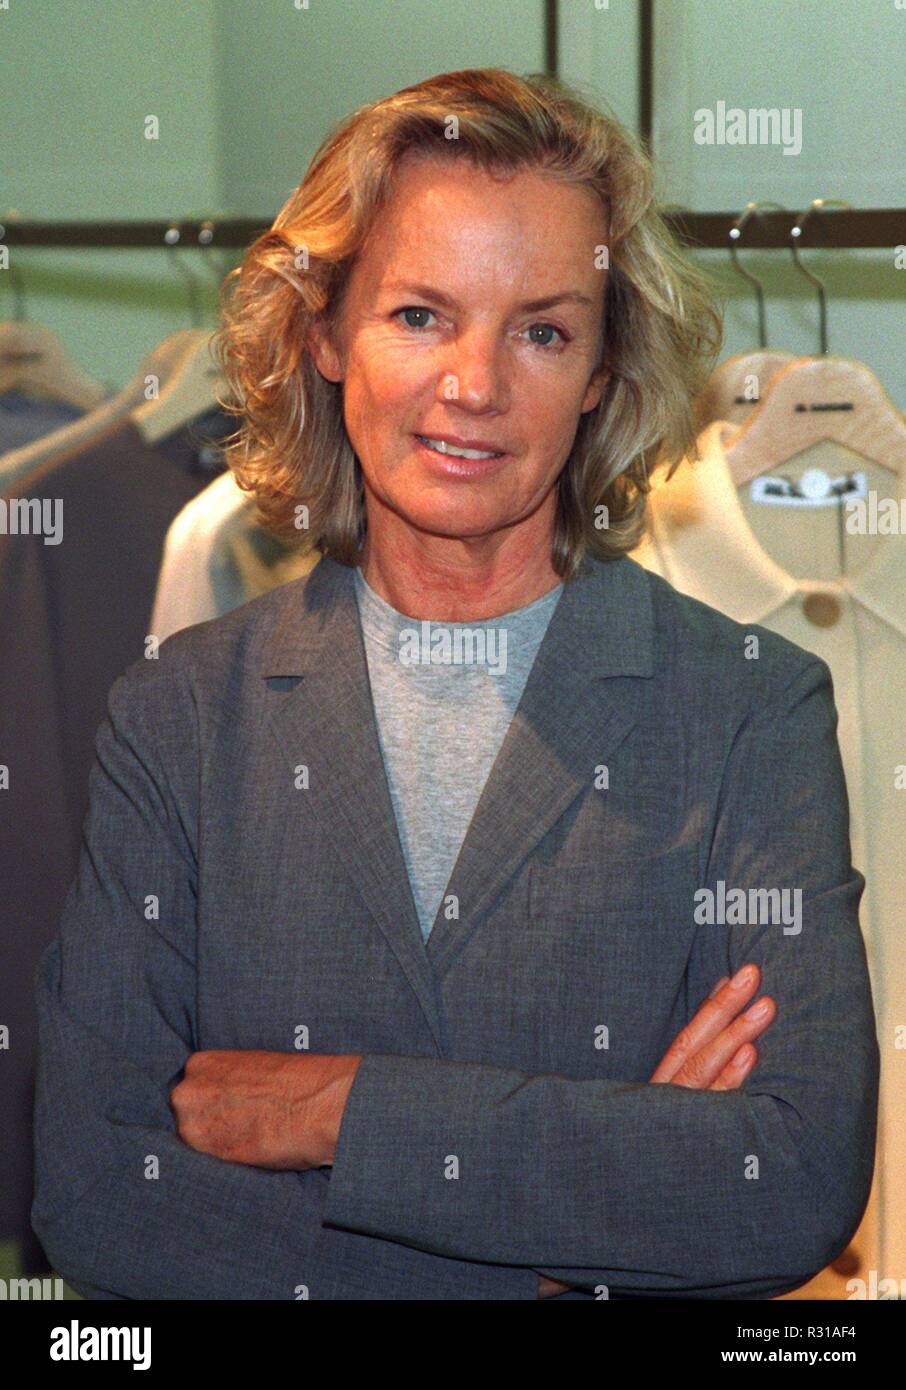 dpa files) - The German fashion designer Jil Sander smiles at the opening  of her new store in Munich, 13 September 1996. | usage worldwide Stock  Photo - Alamy